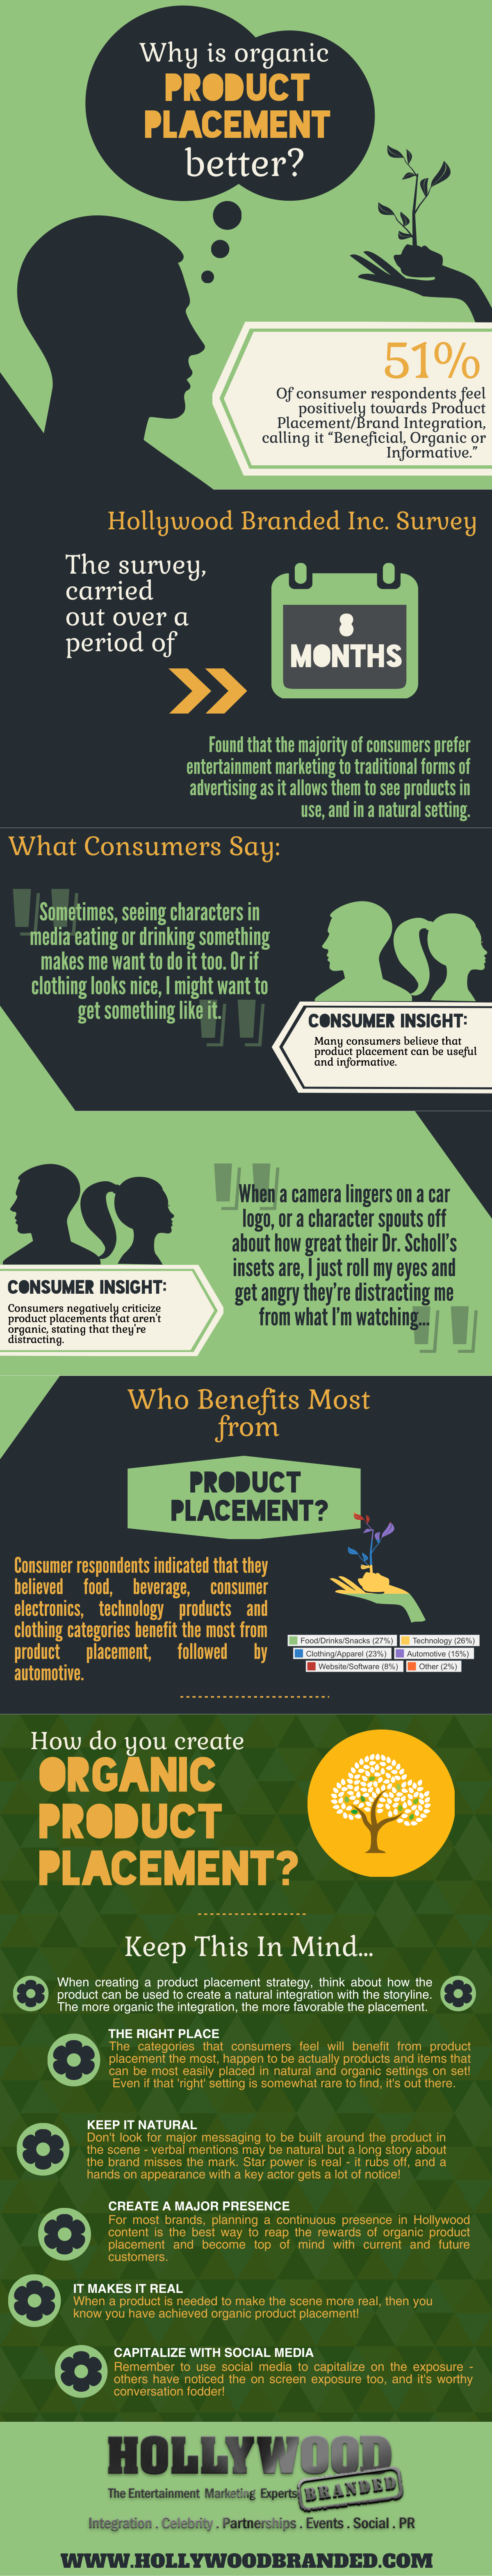 Infographic on How to Create Organic Product Placement and Align With Social Media Marketing Strategies